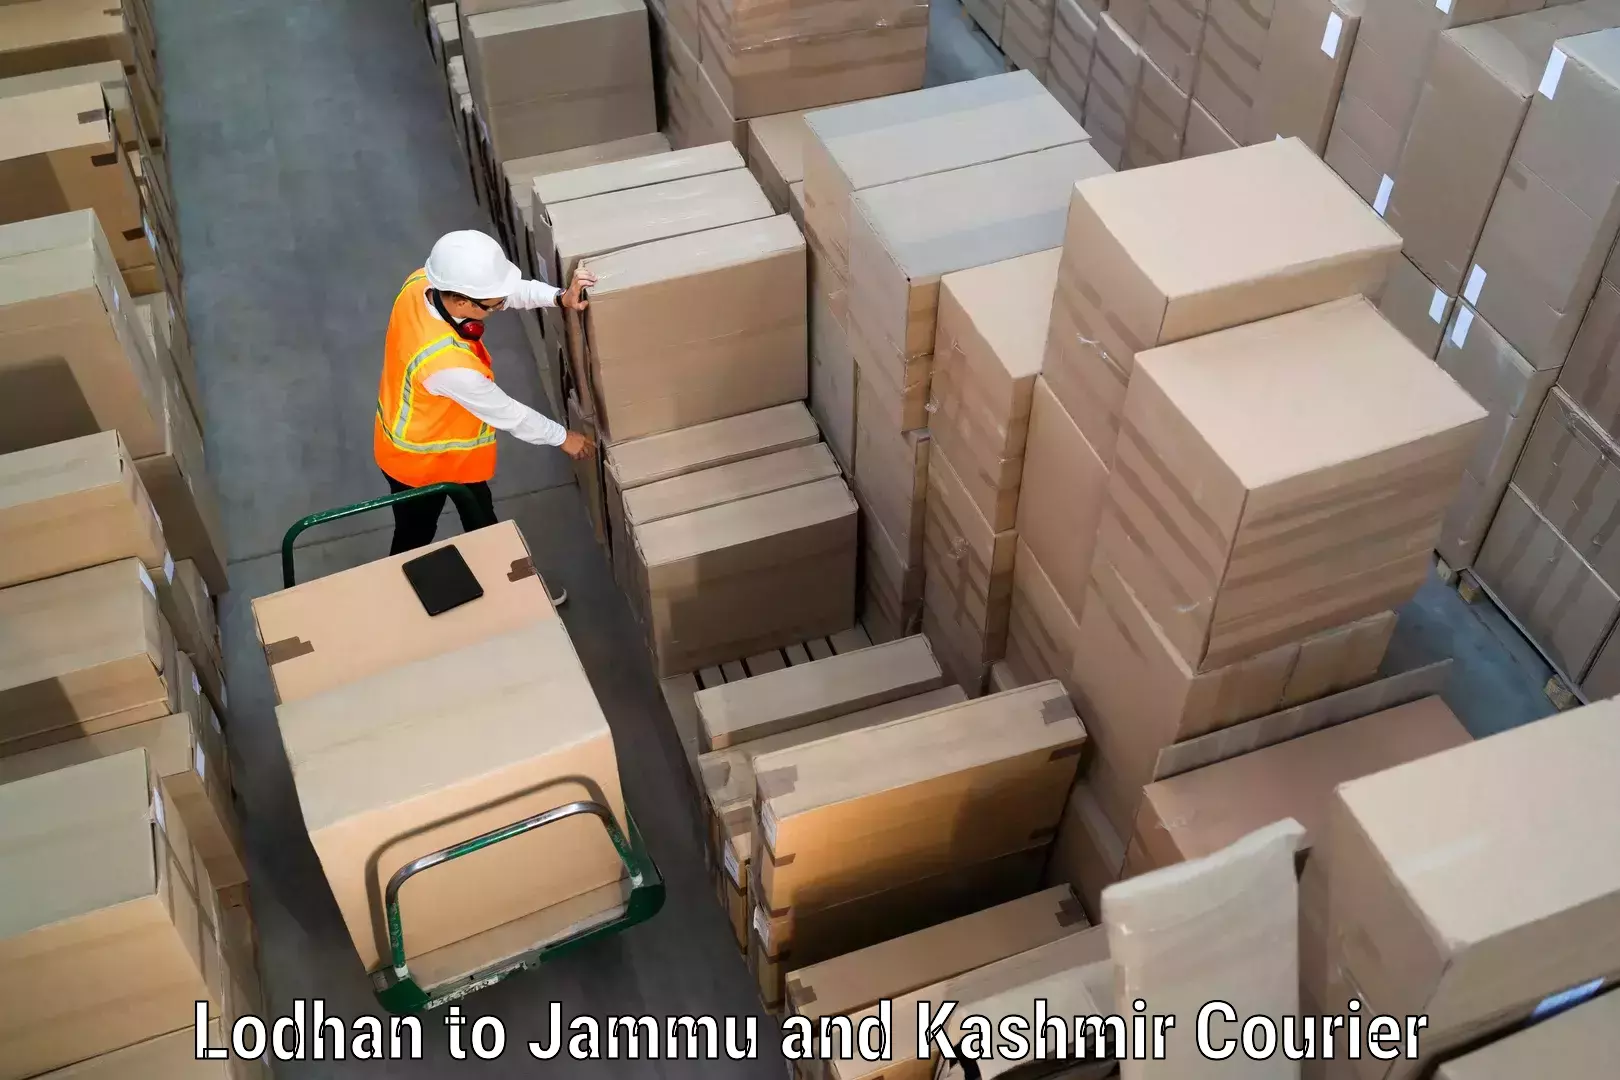 Efficient order fulfillment Lodhan to Jammu and Kashmir